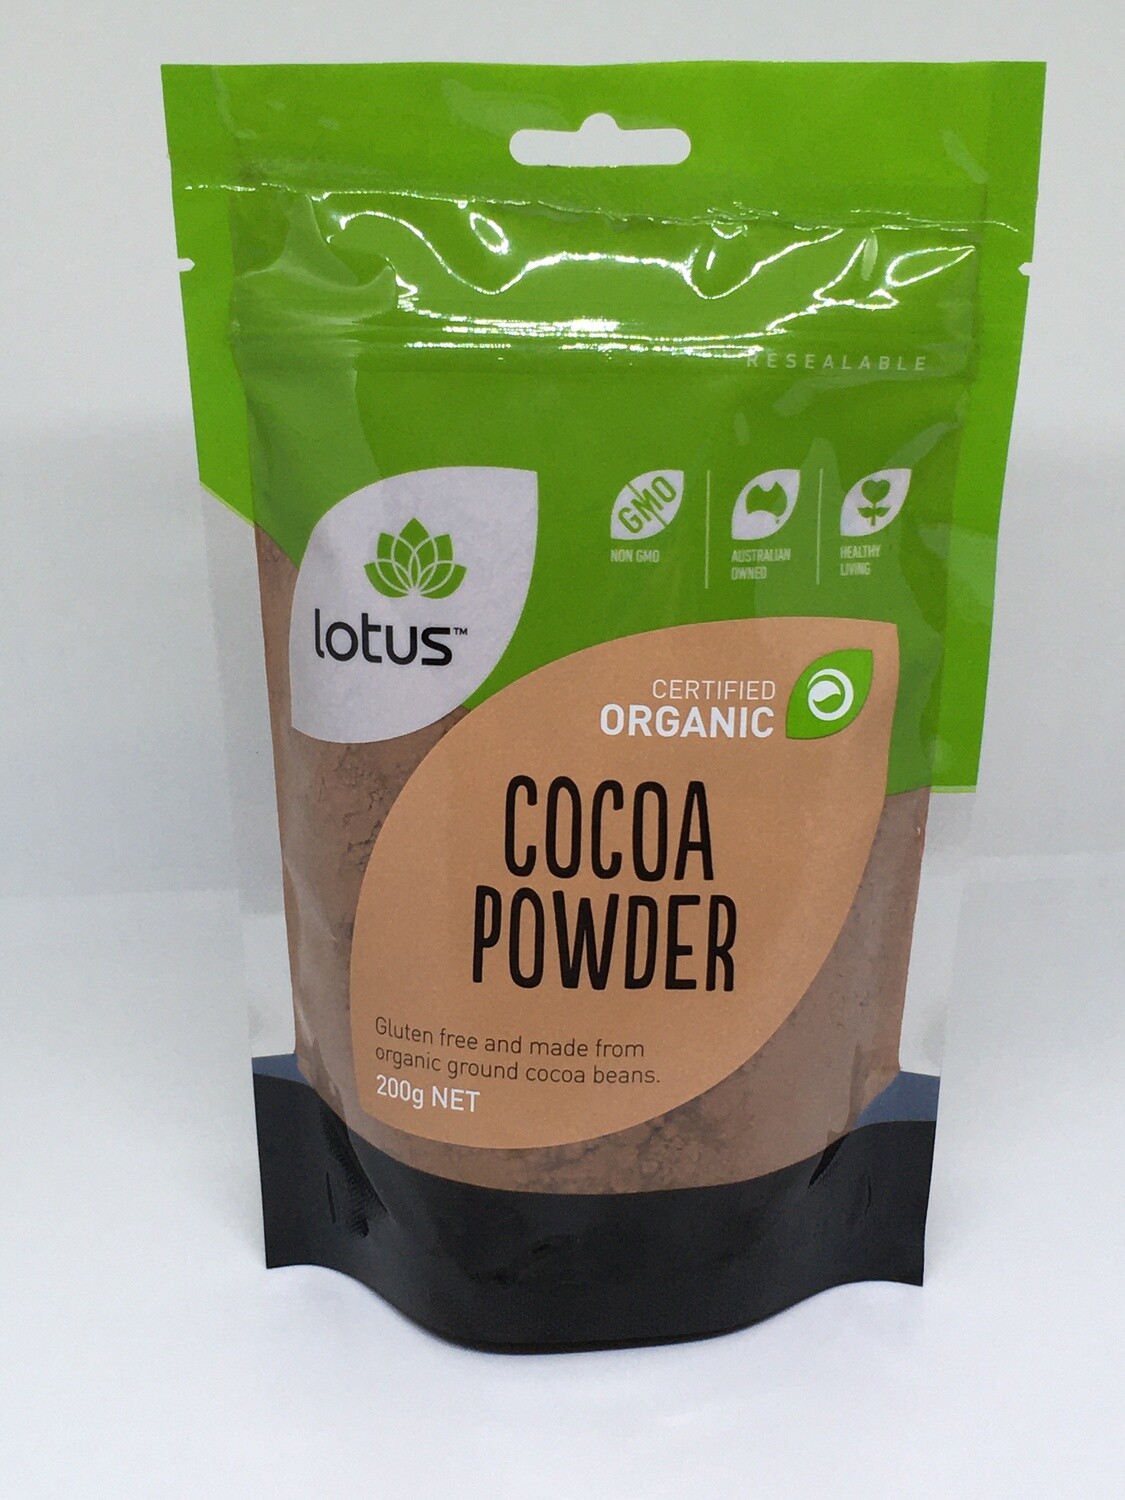 Organic Cocoa Powder
Ideal for baking, hot chocolate or smoothies.